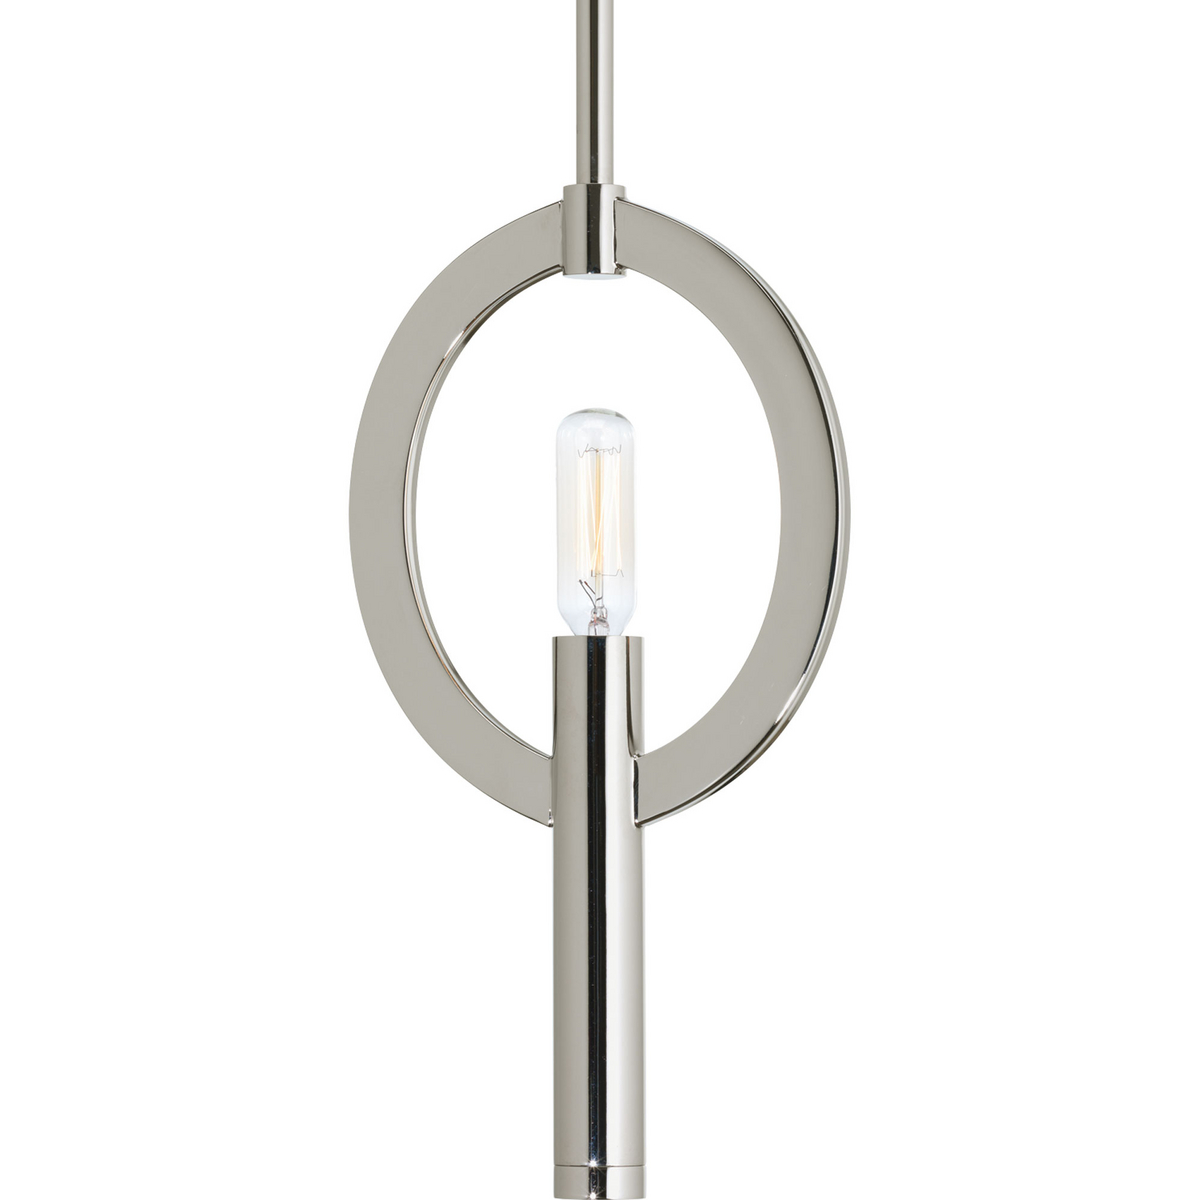 With style, charm and intrigue, it's all about achieving architectural interest with Draper. While polished detailing and tubular forms contribute to an authentic style, the candelabra socket accommodates a variety of decorative bulbs. One-light mini-pendant inspired by mid-century modern design.